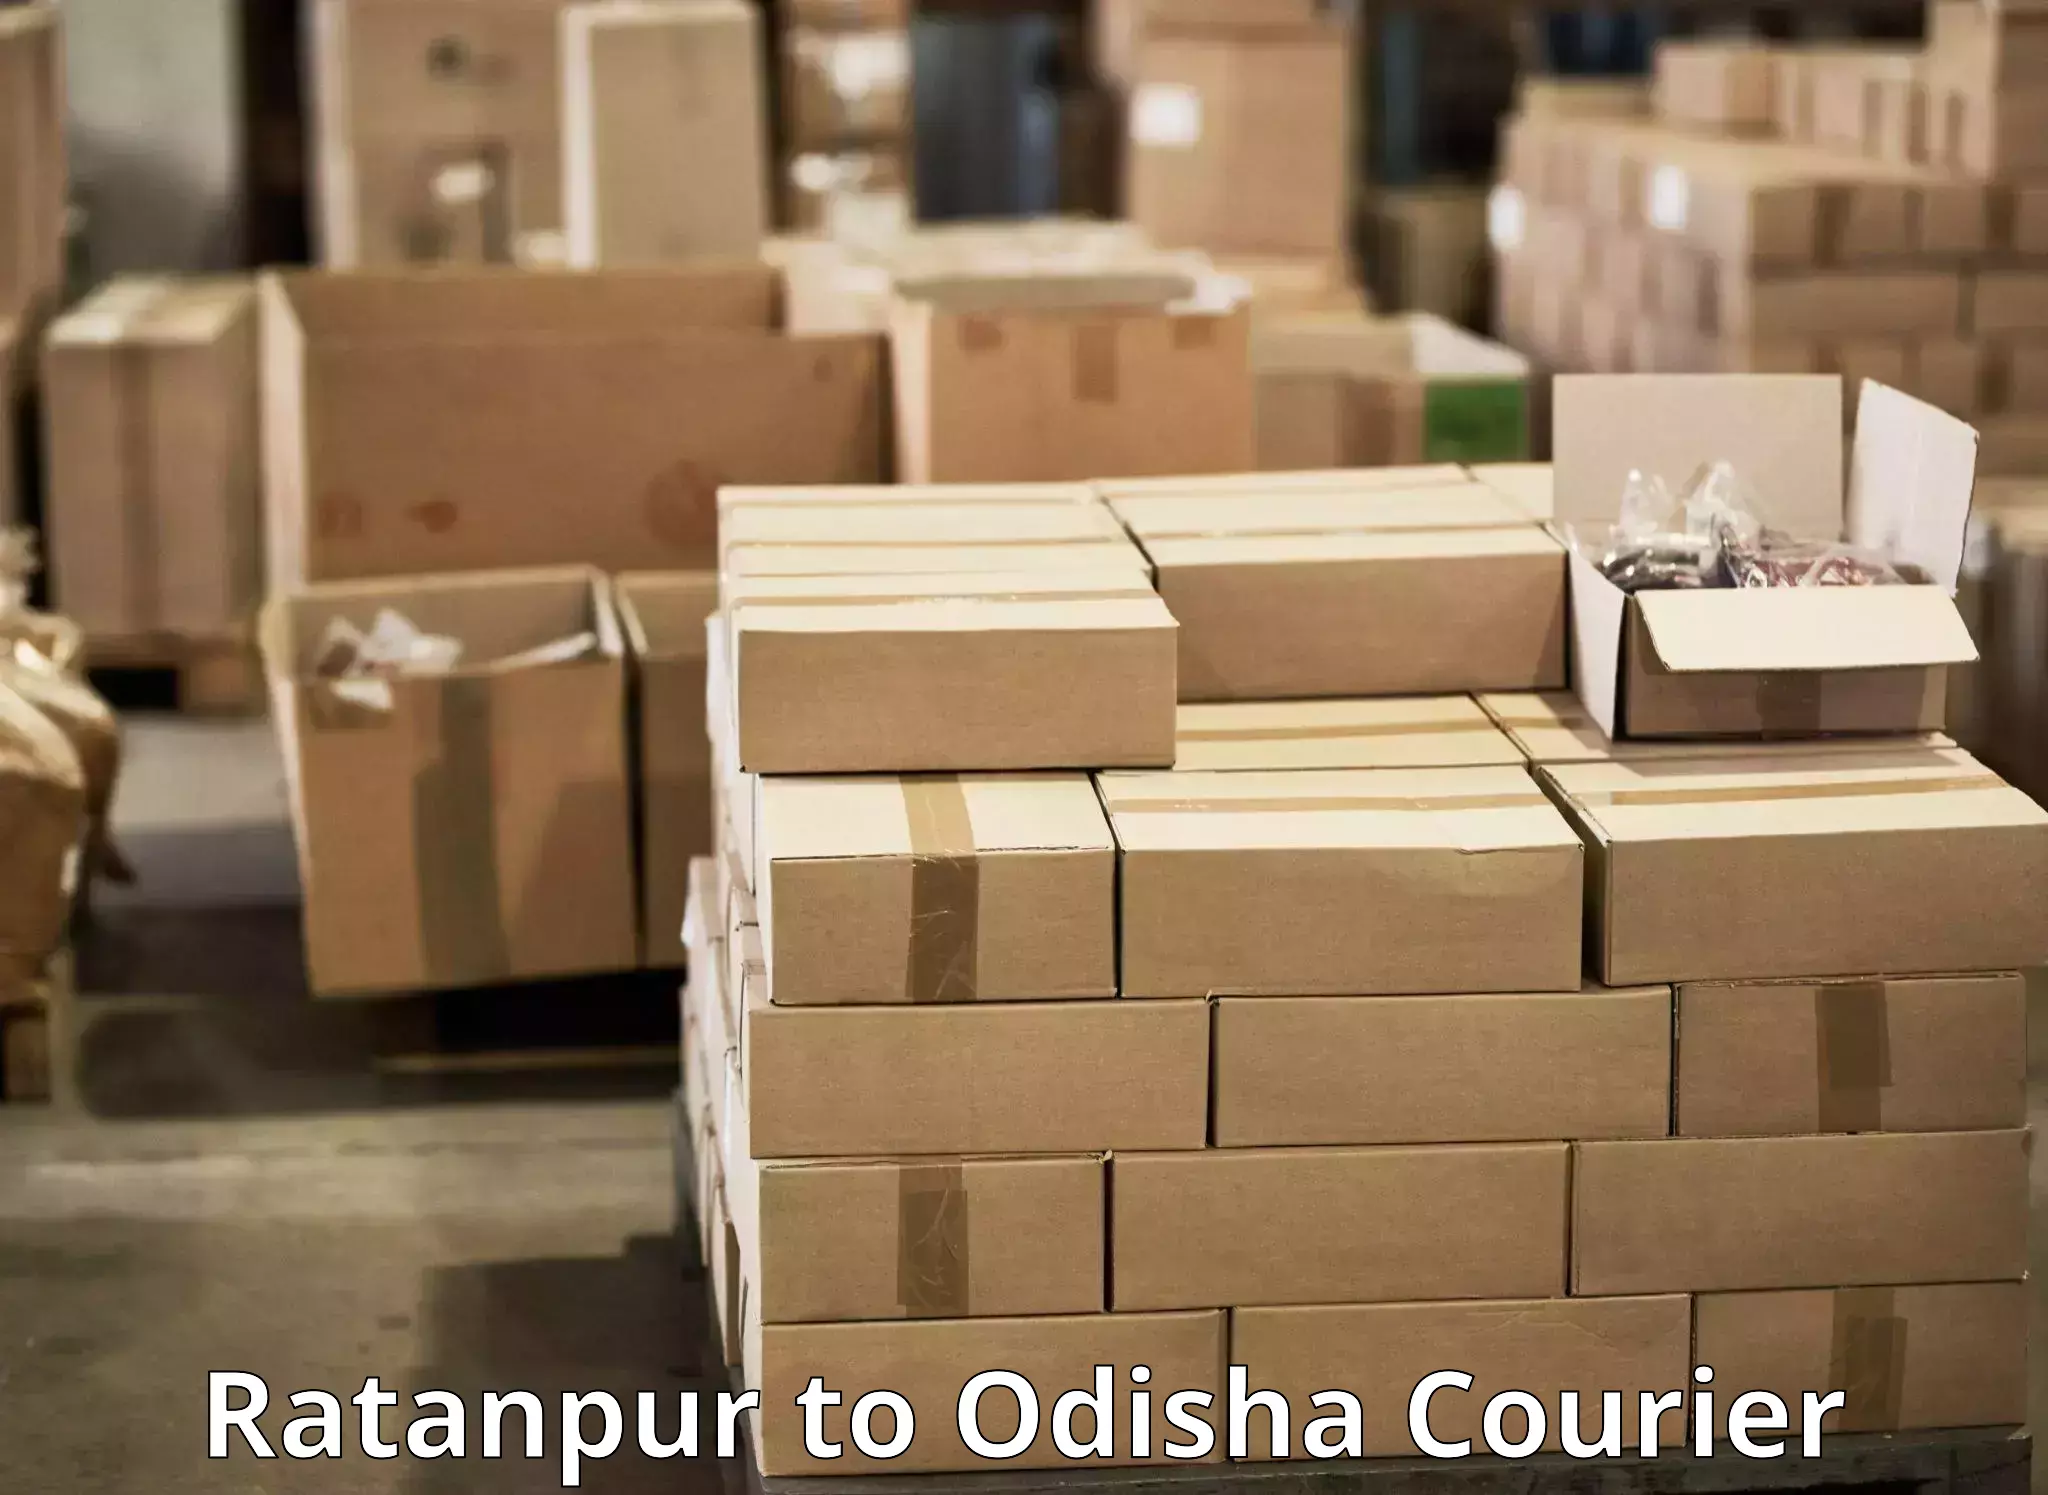 User-friendly delivery service Ratanpur to Paralakhemundi